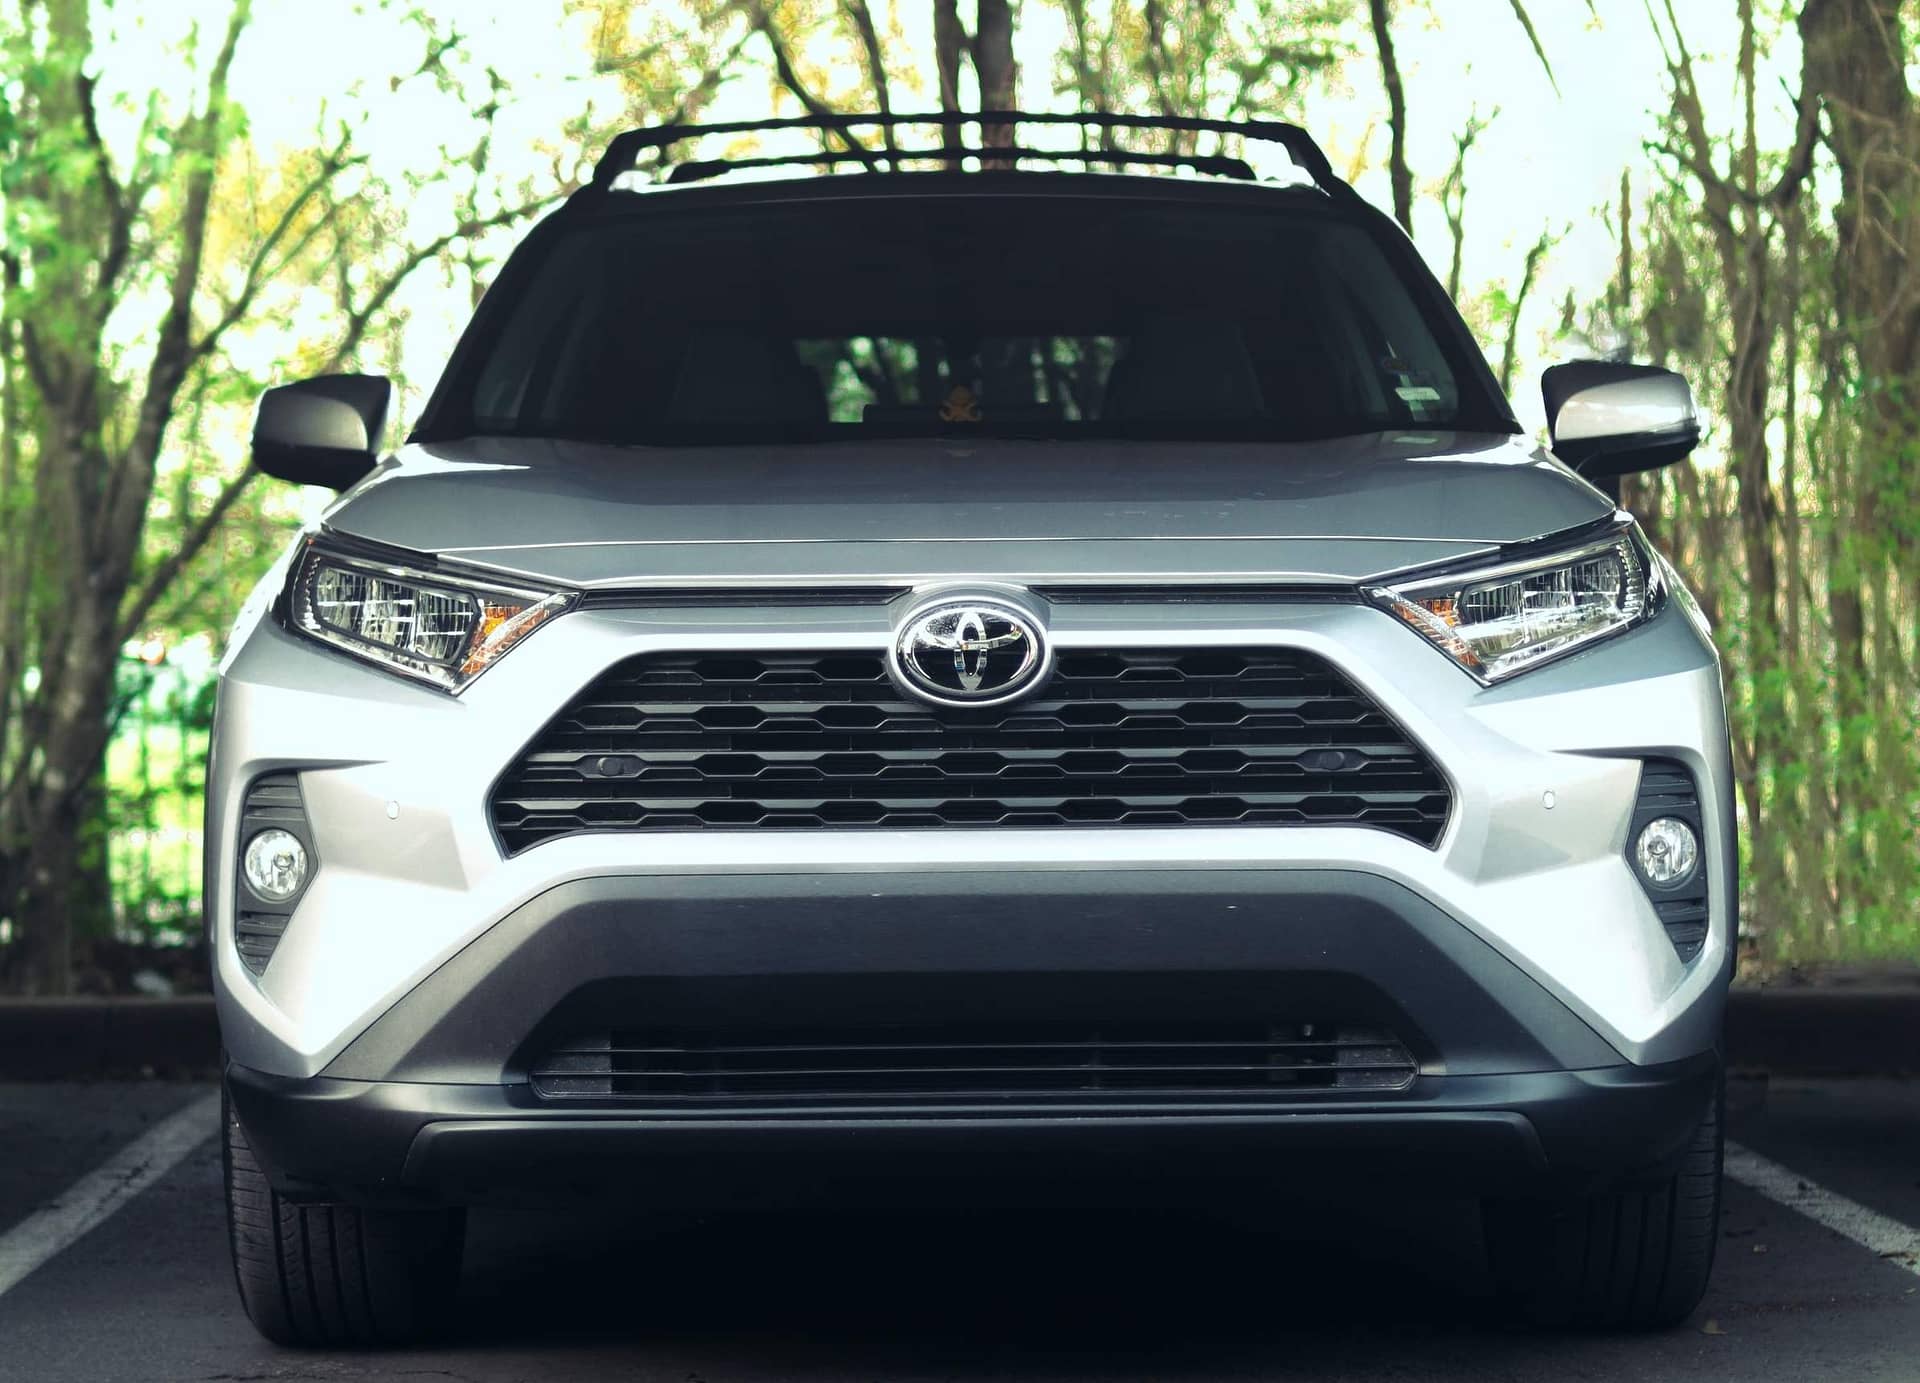 Toyota RAV4 Hybrid Has Some Amazing New Features To Check Out